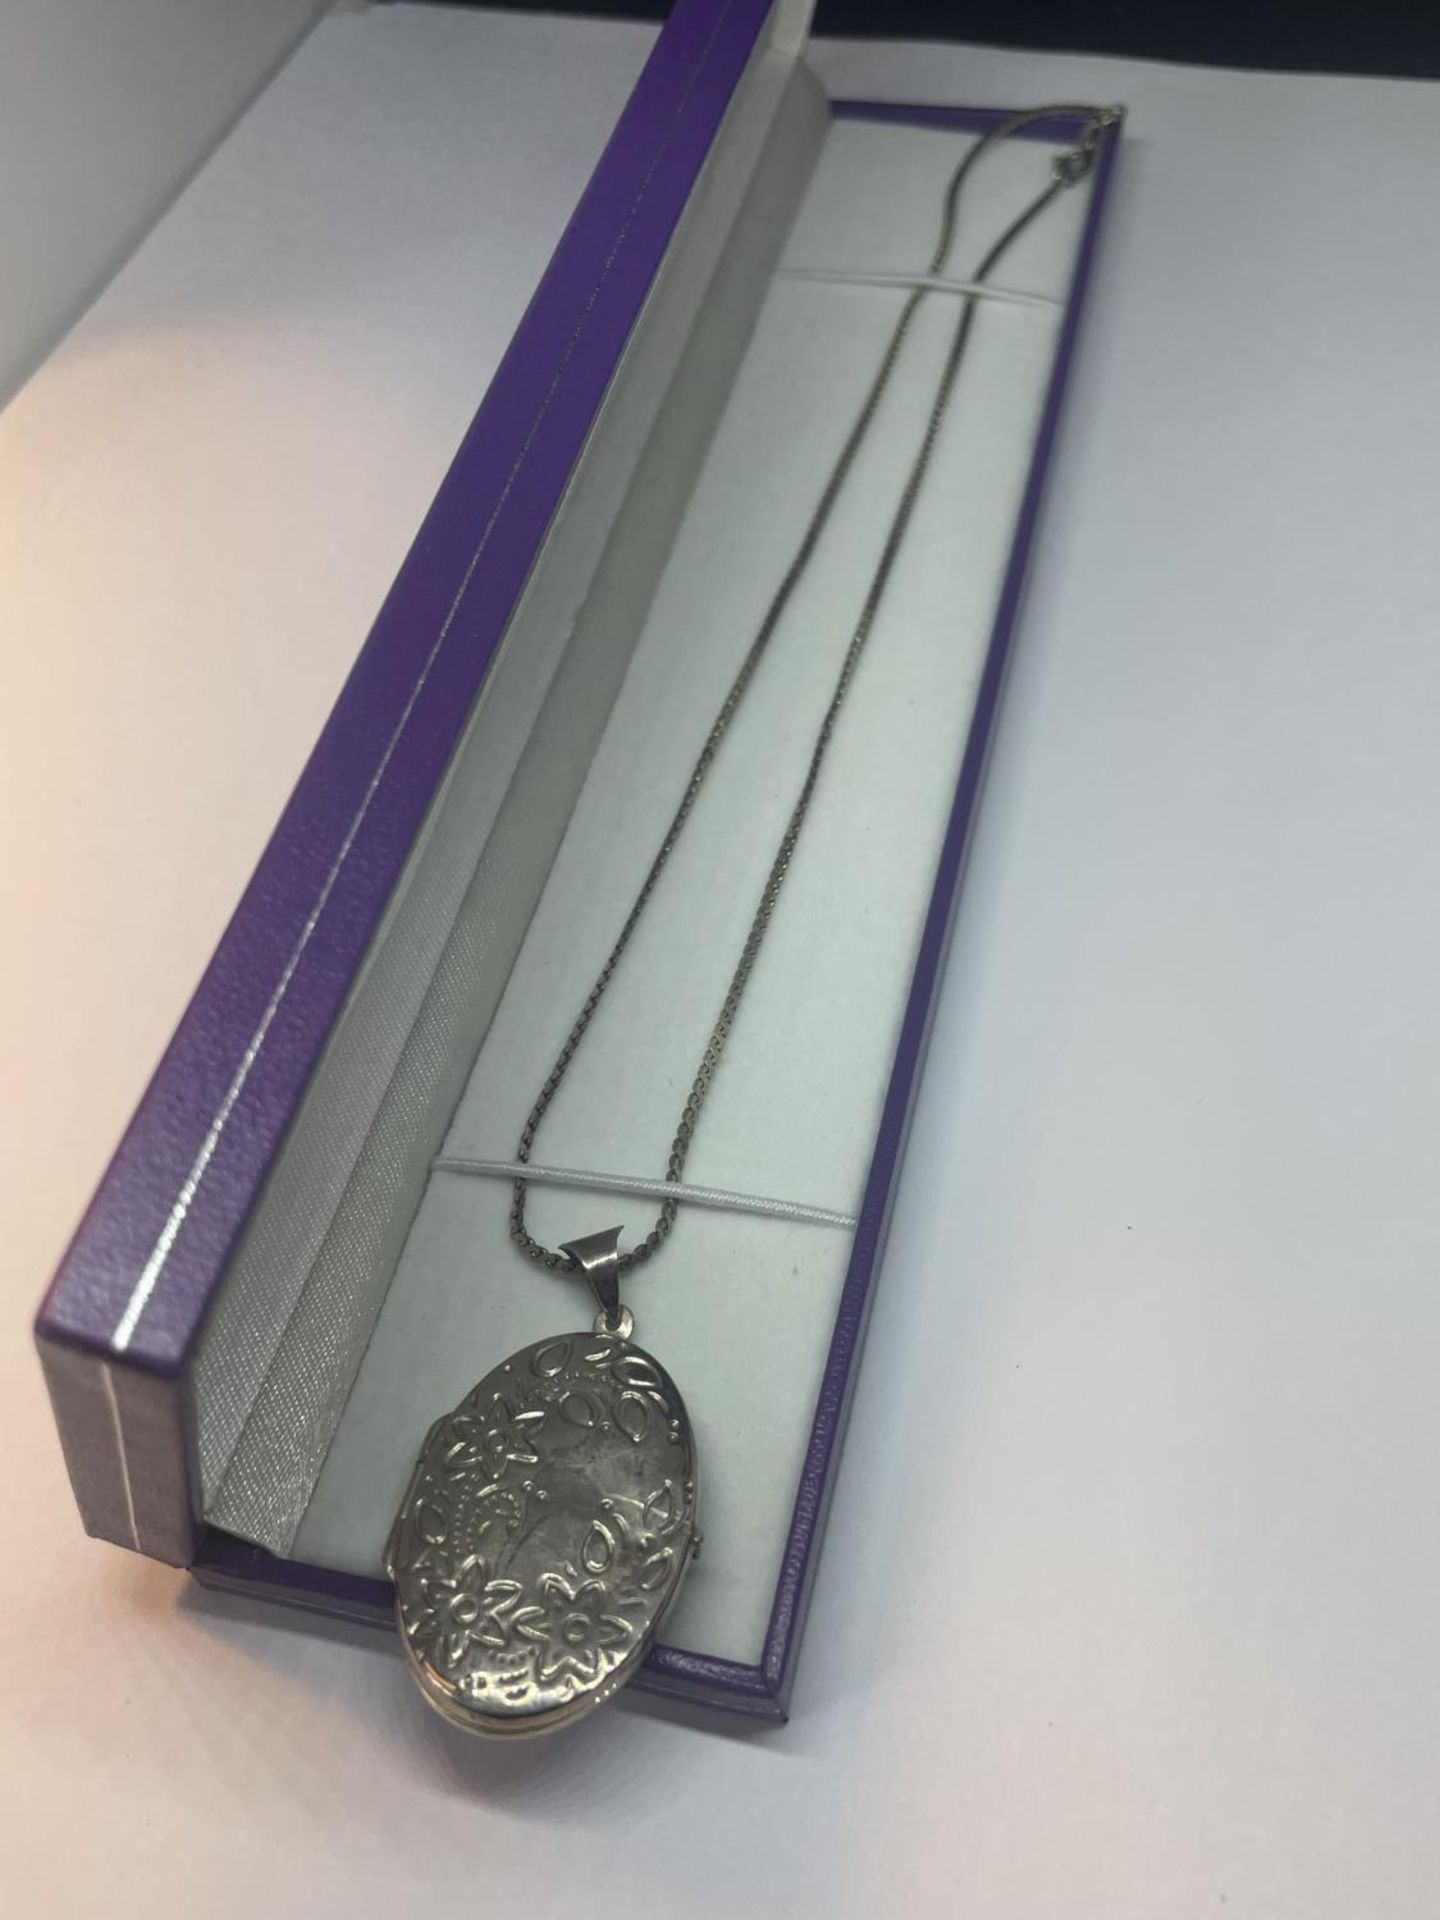 A MARKED SILVER NECKLACE WITH A LOCKET PENDANT IN A PRESENTATION BOX